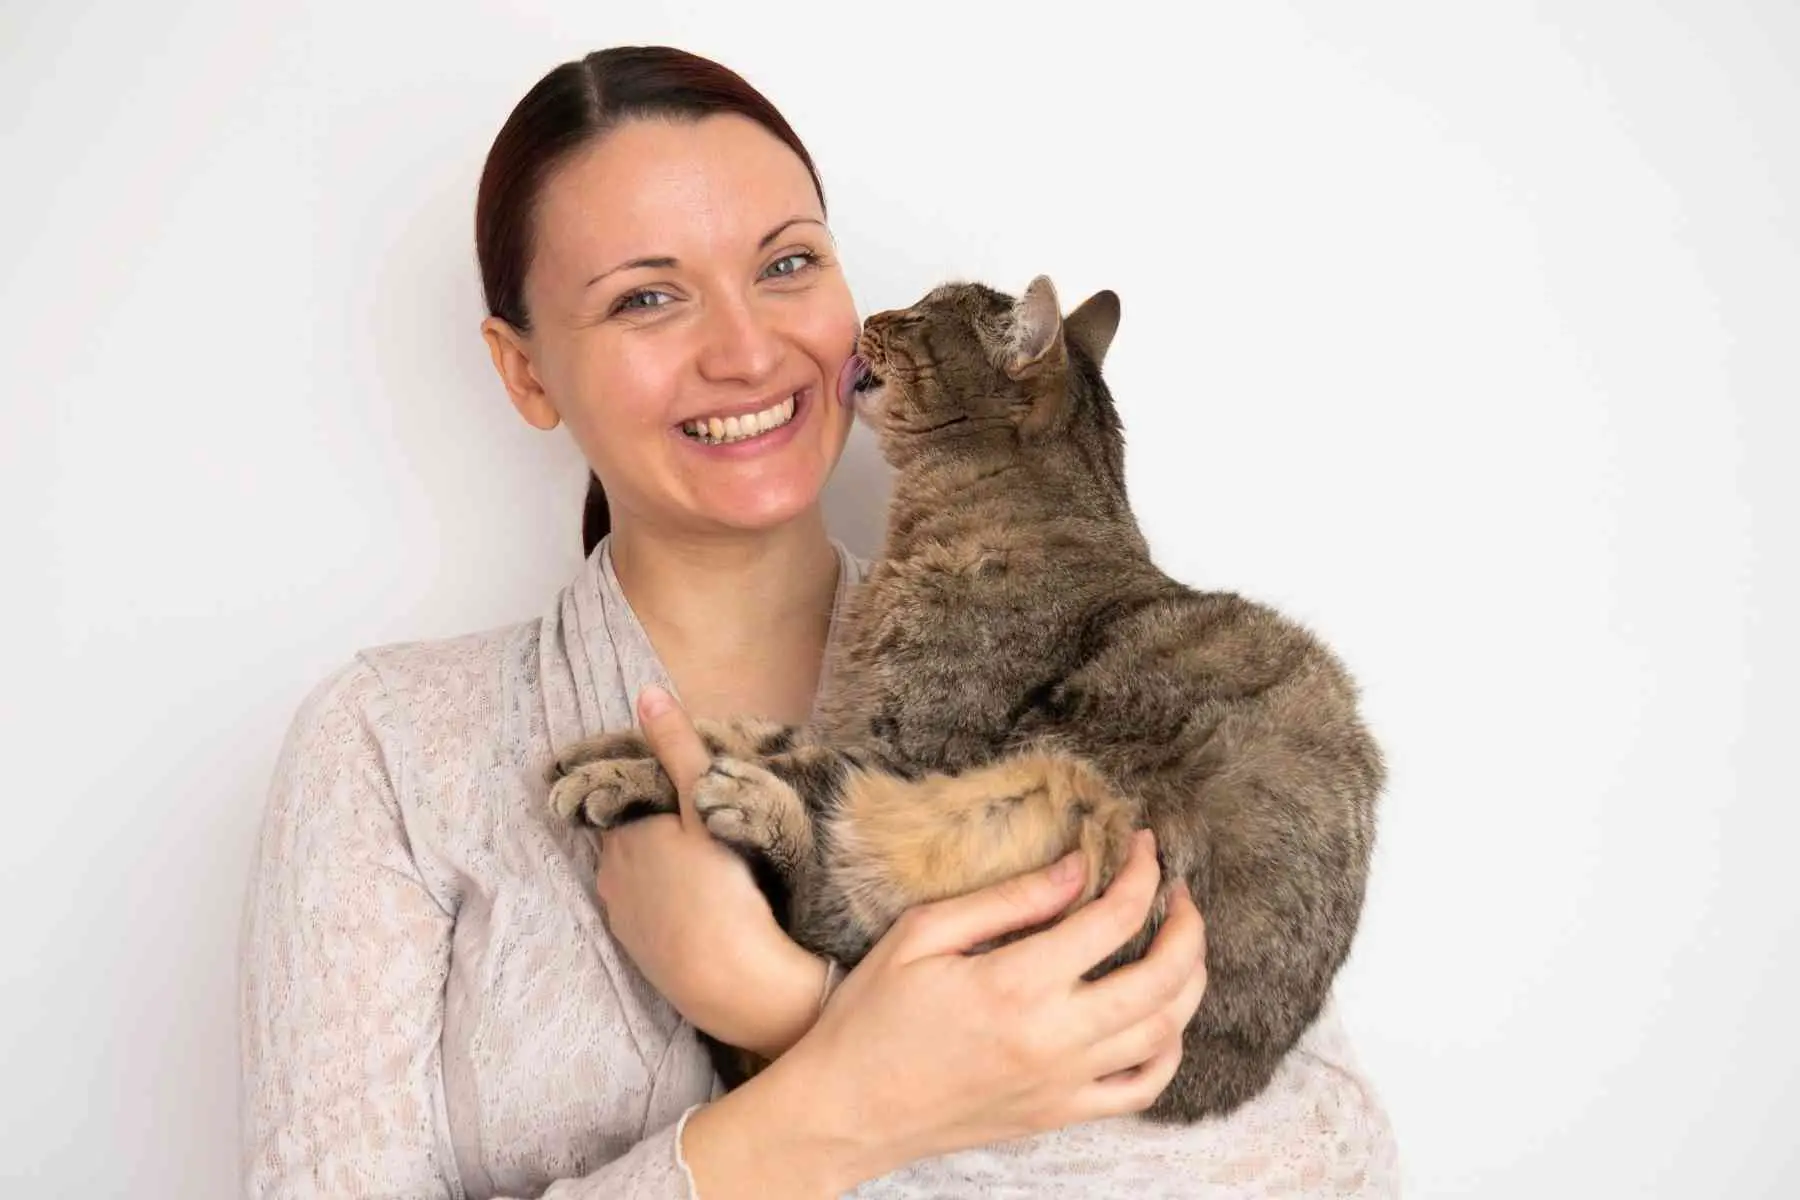 Cat licking smiling woman's face